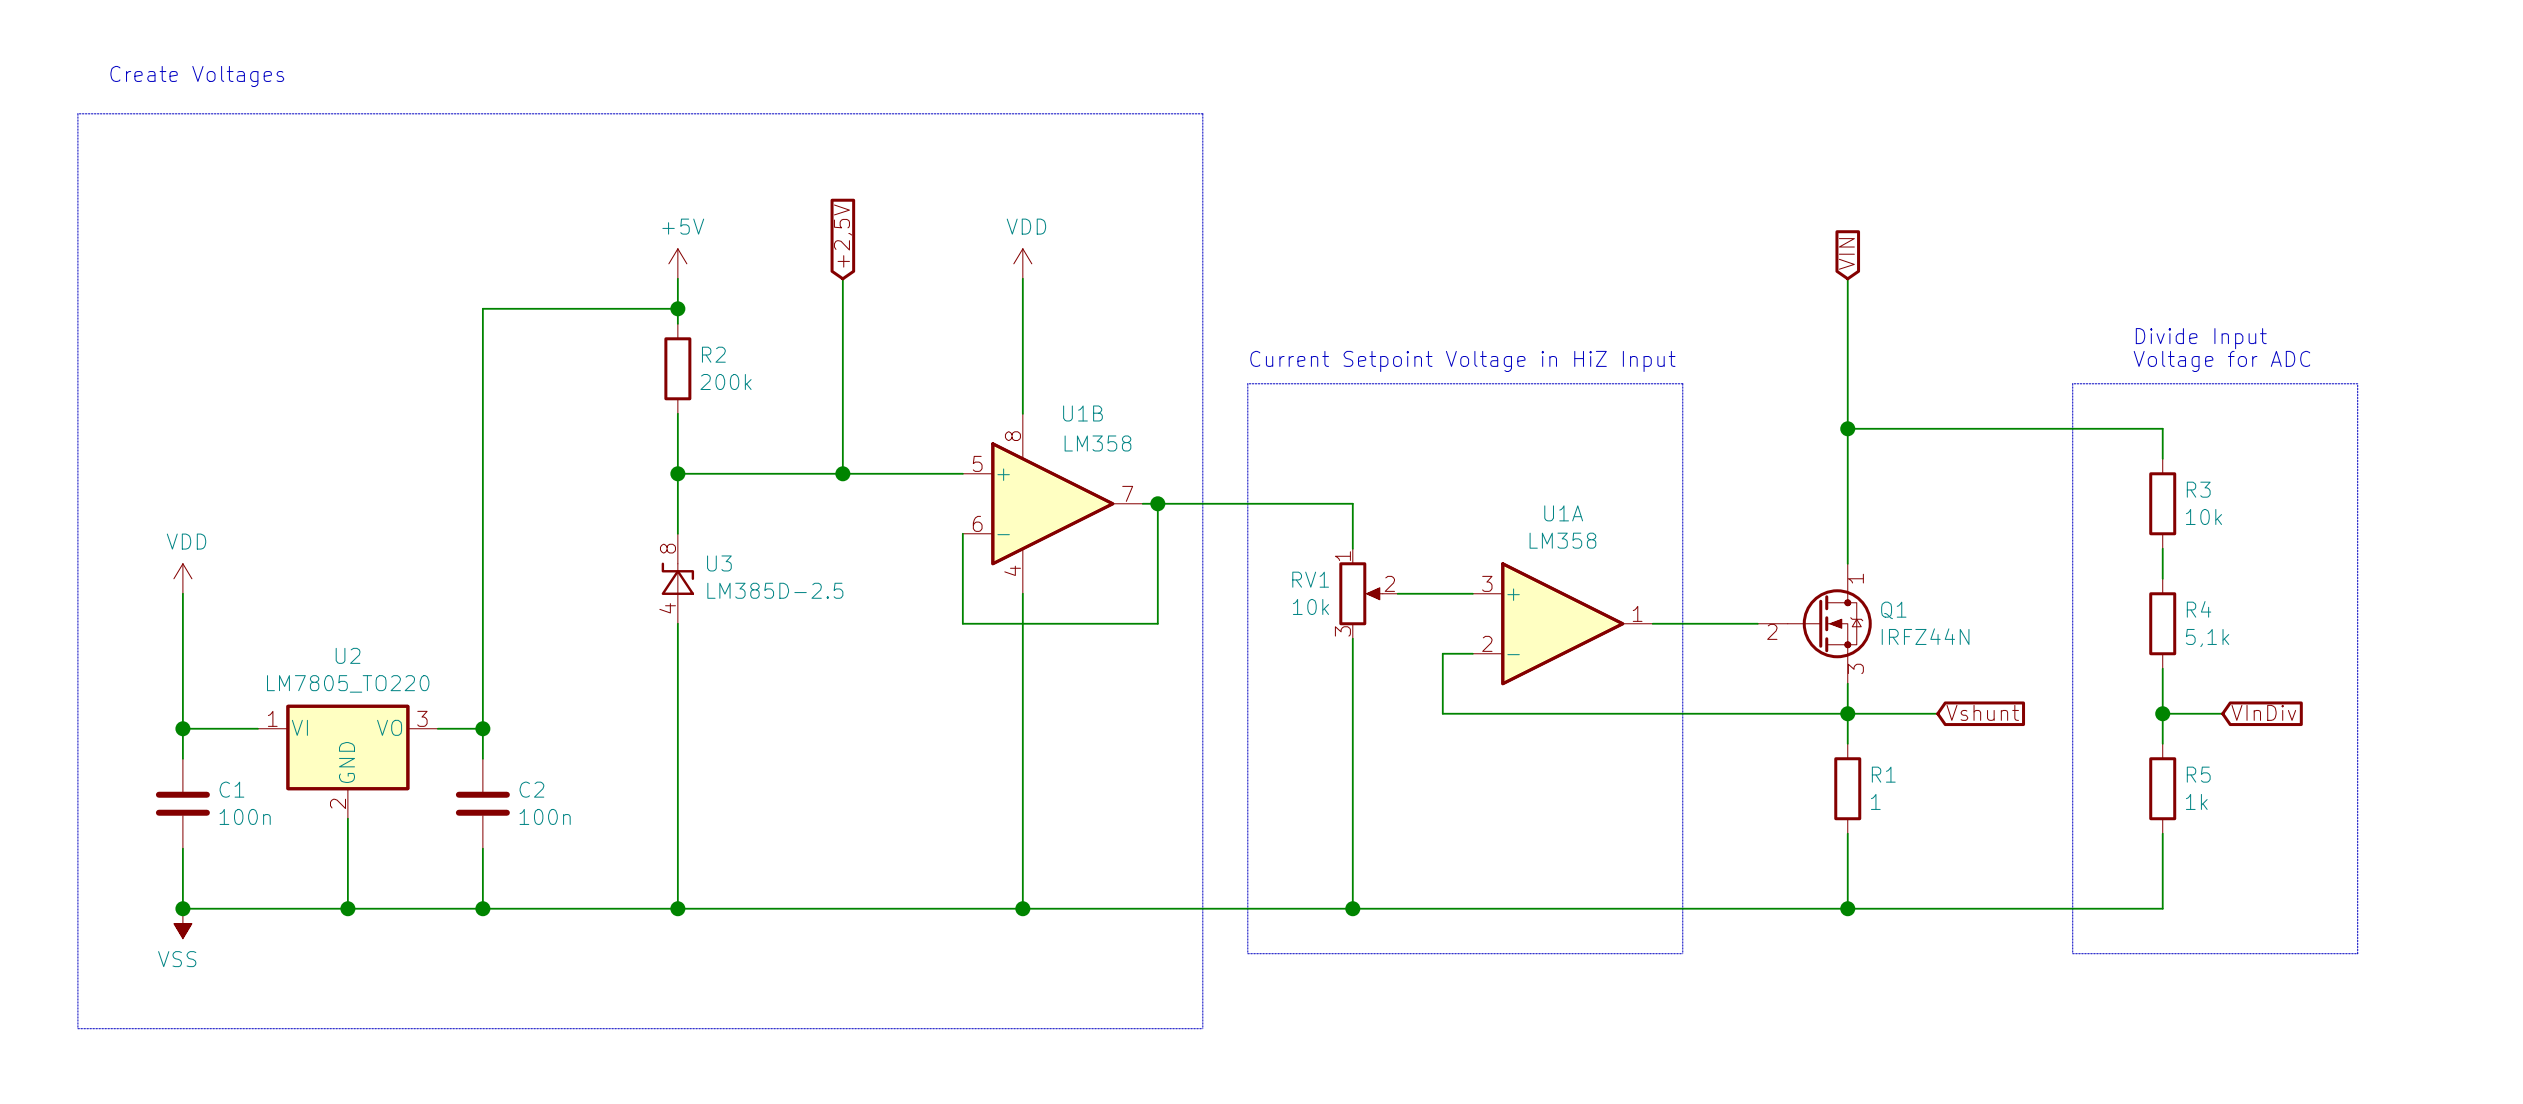 Schematic of my Proof-of-Concept Electronic Load